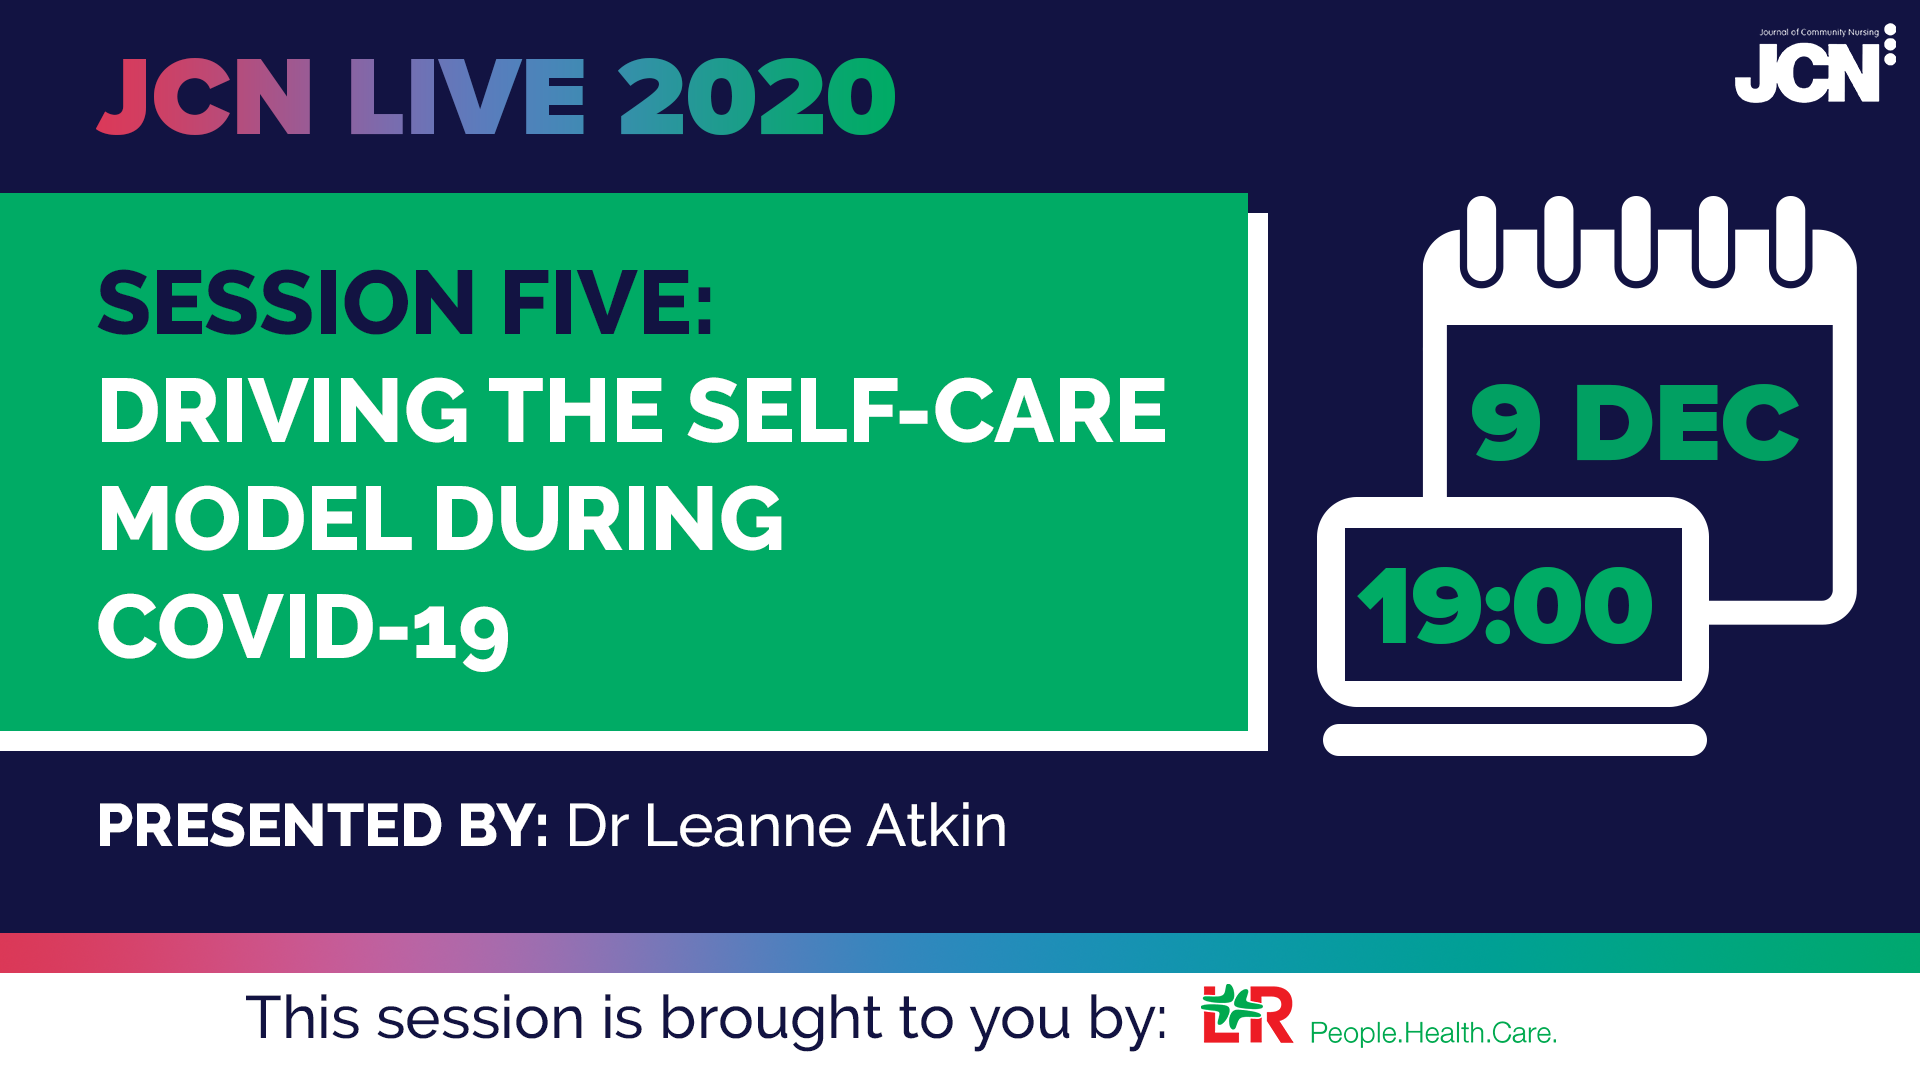 JCN LIVE 2020: DRIVING THE SELF-CARE MODEL DURING COVID-19